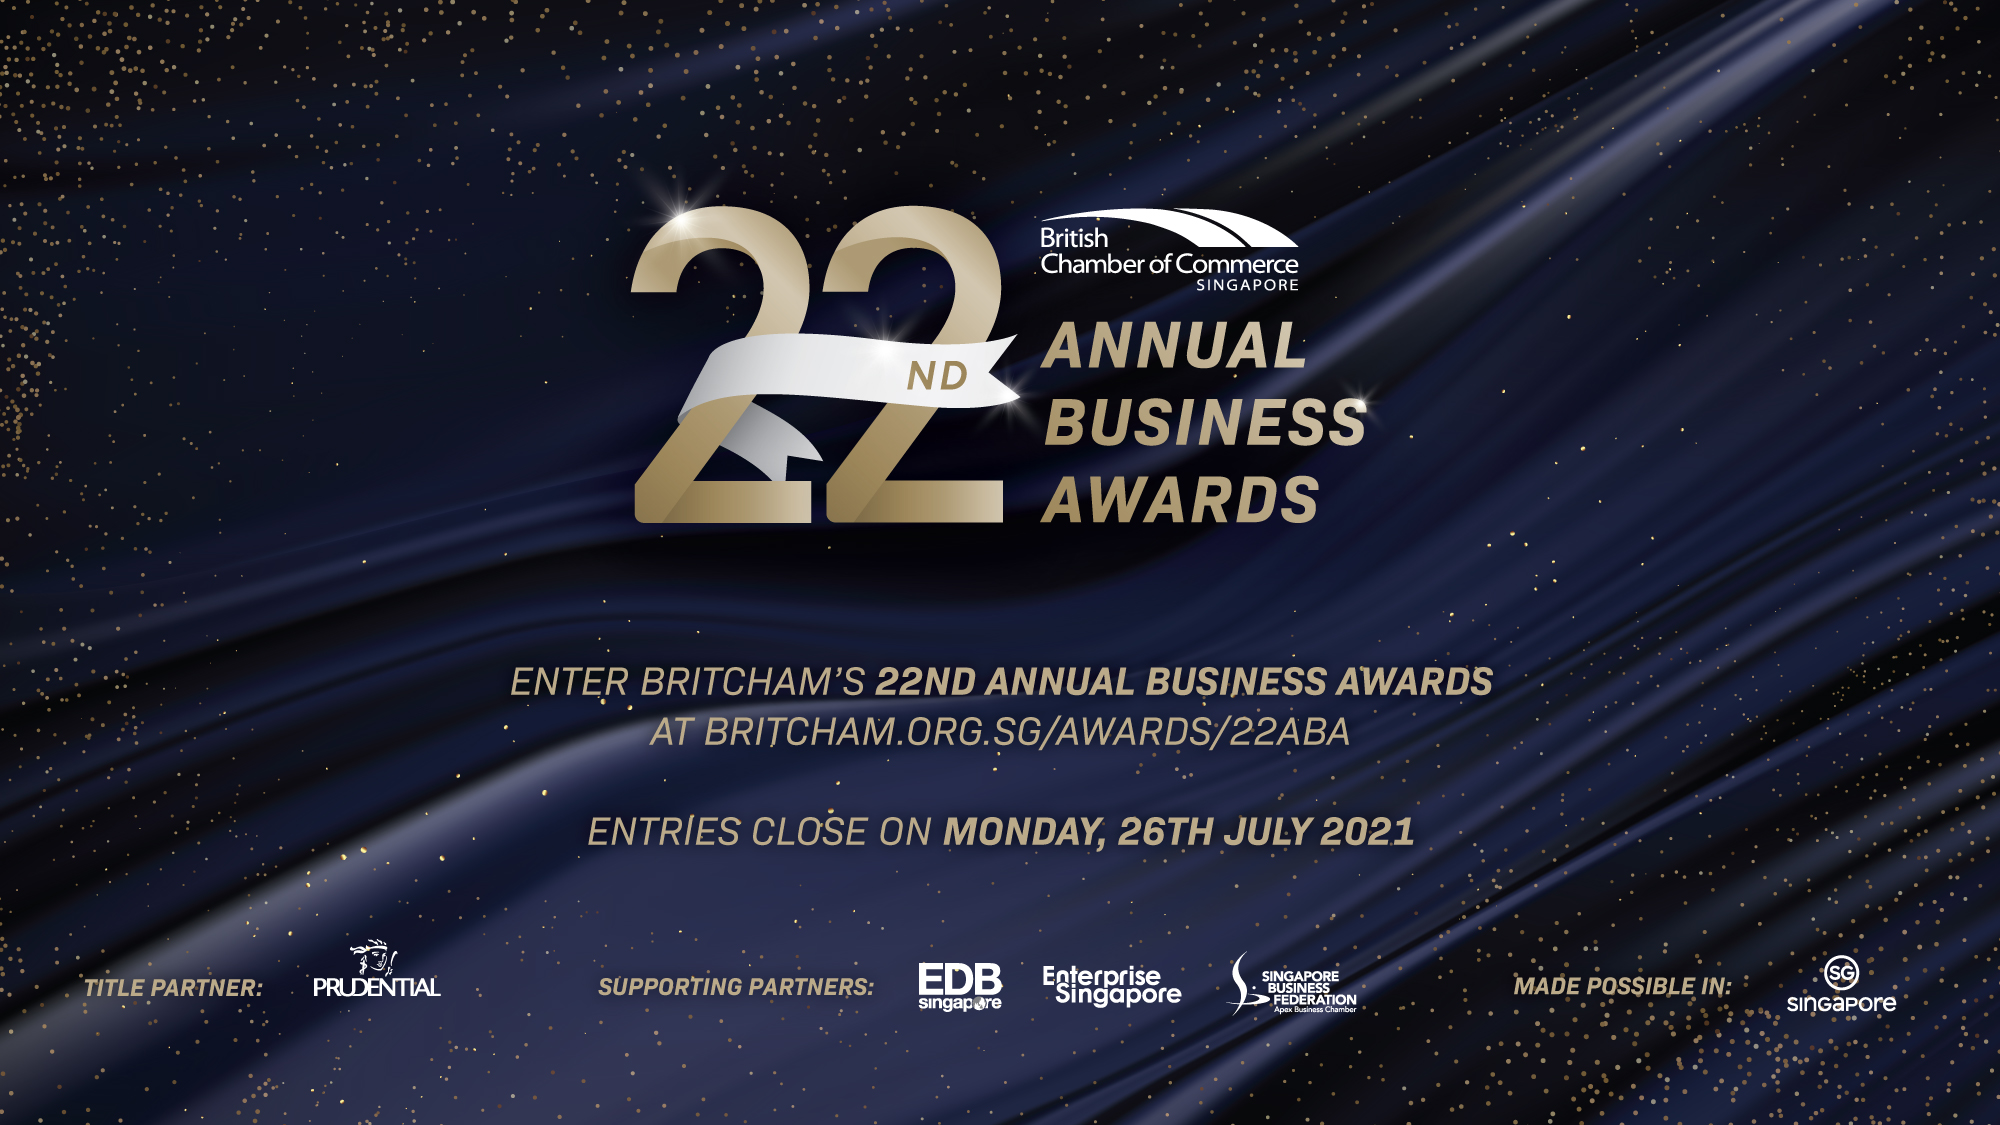 22nd Annual Business Awards